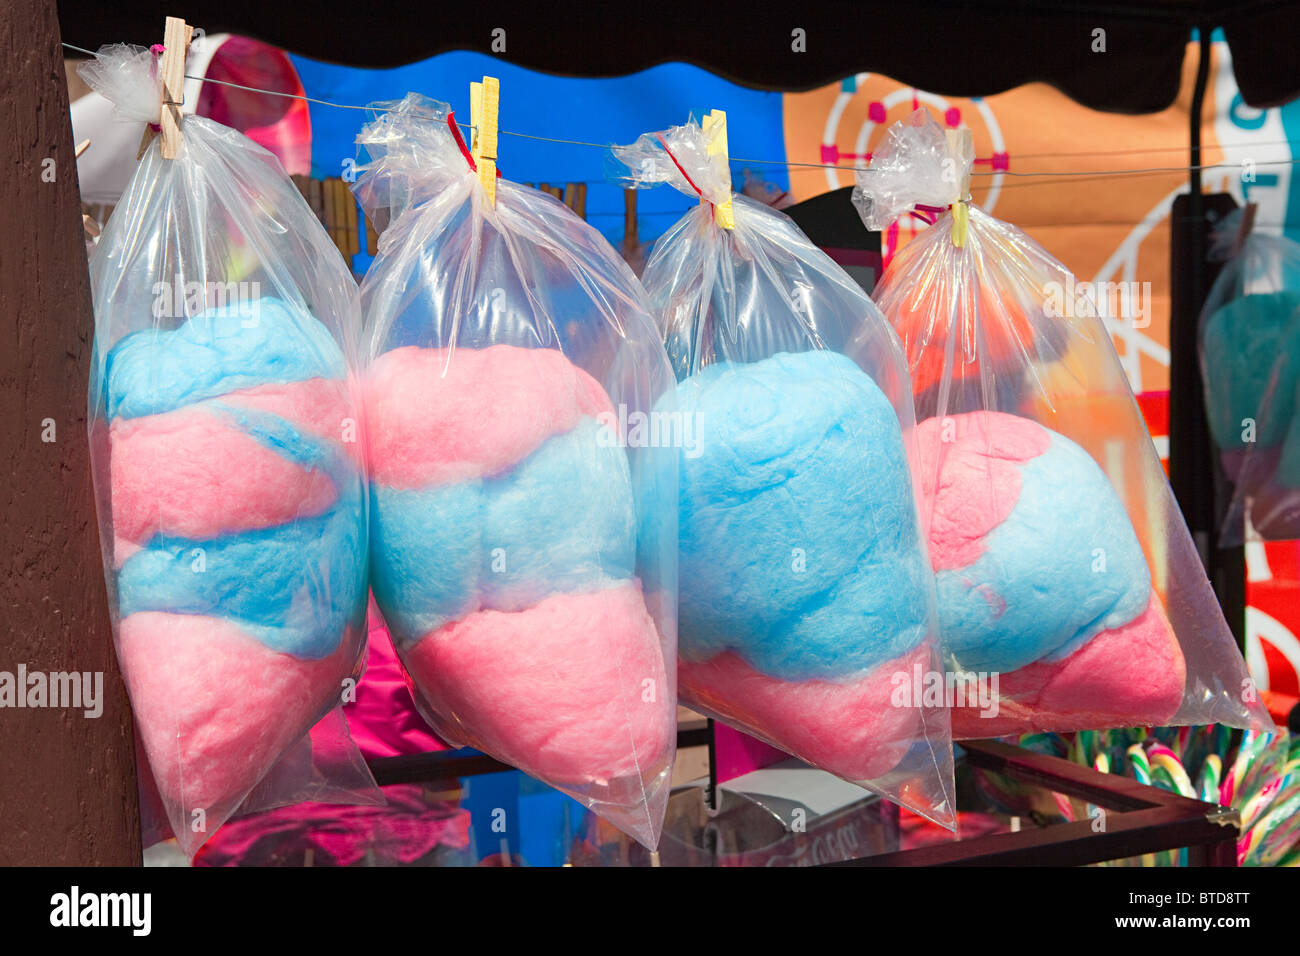 Cotton candy and fun fair stall, Coney Island Stock Photo